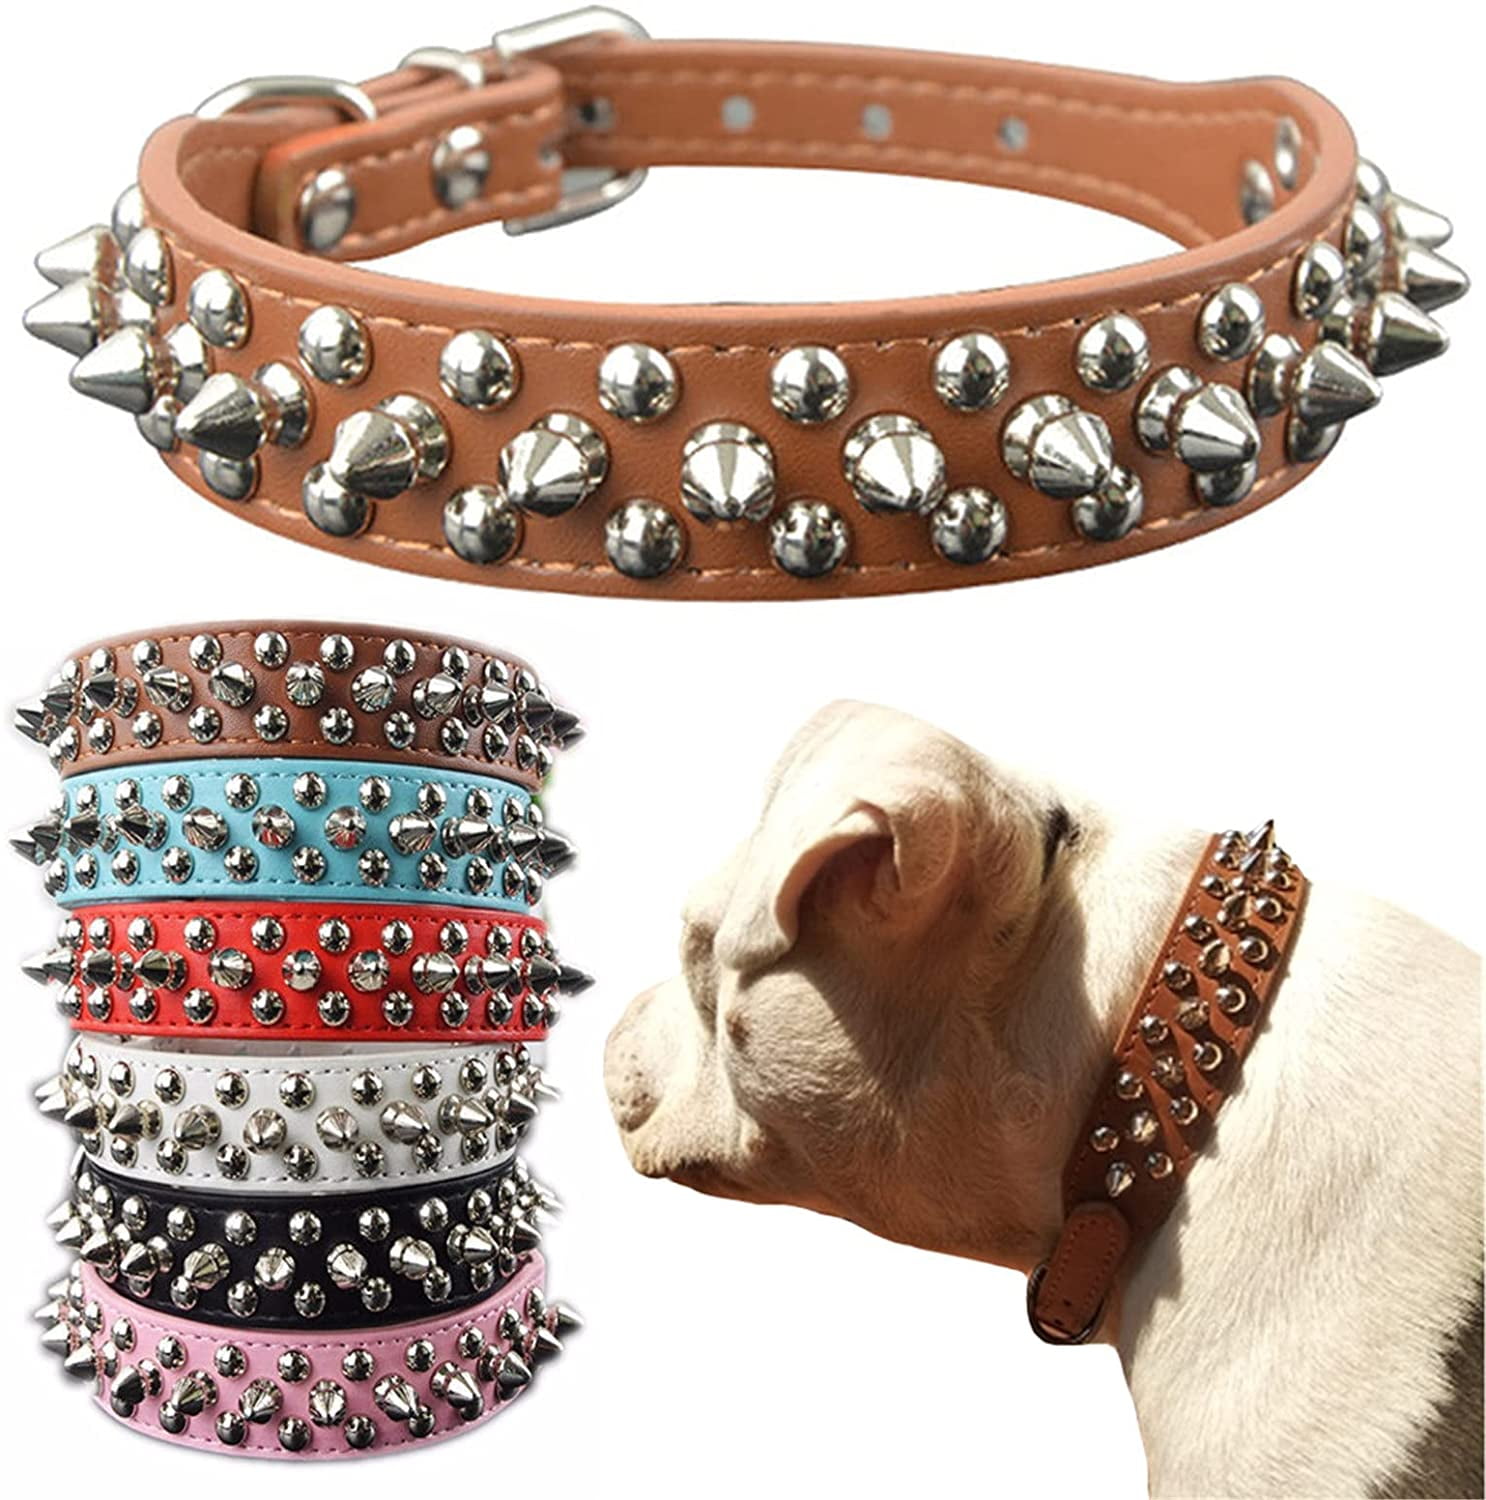 Leather Paw Studded Dog Collar Pet Puppy Collars for Small Medium Dogs Chihuahua 